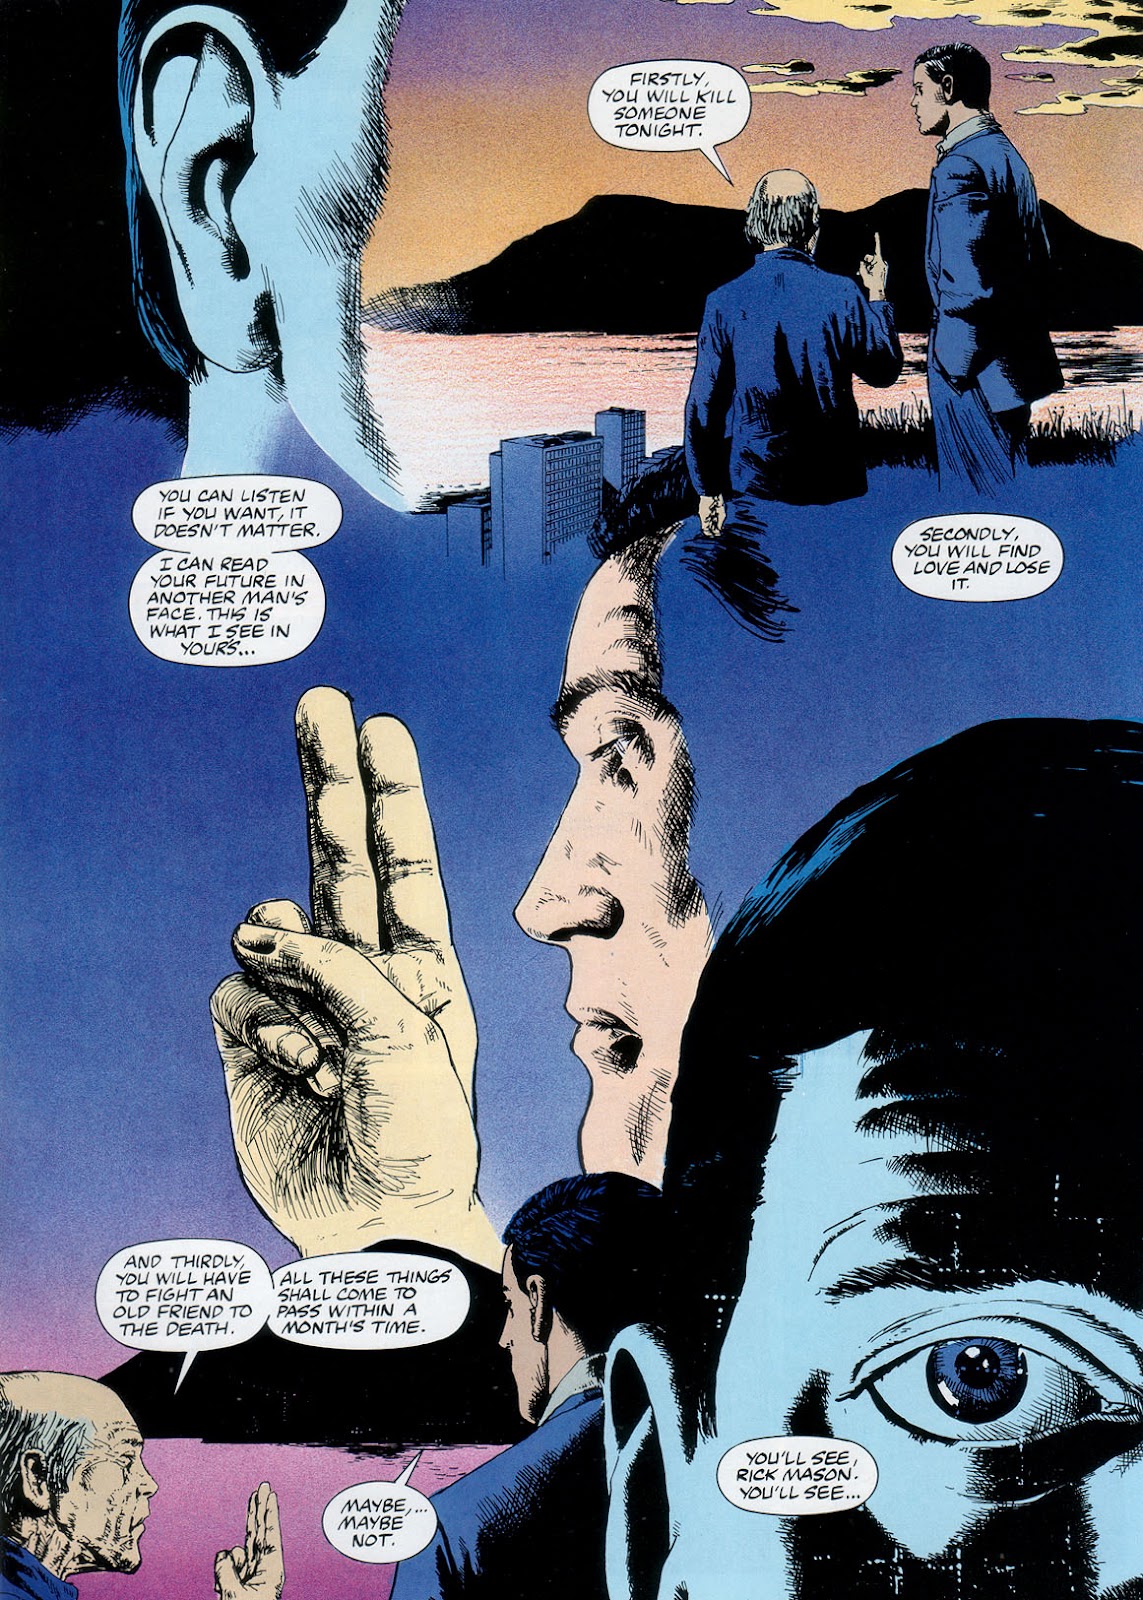 Marvel Graphic Novel issue 57 - Rick Mason - The Agent - Page 56